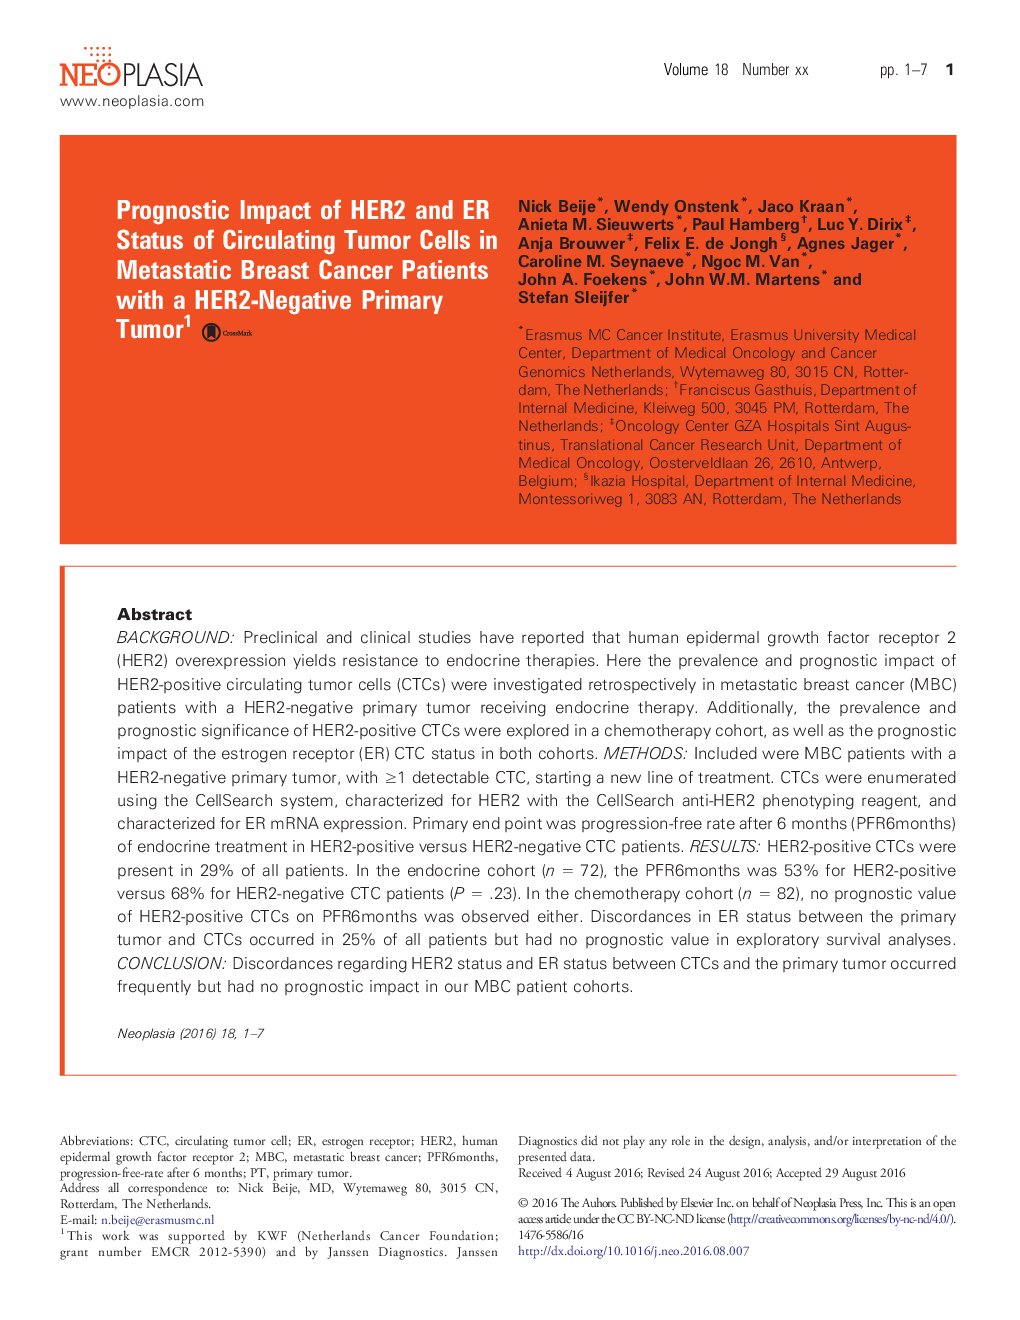 Prognostic Impact of HER2 and ER Status of Circulating Tumor Cells in Metastatic Breast Cancer Patients with a HER2-Negative Primary Tumor